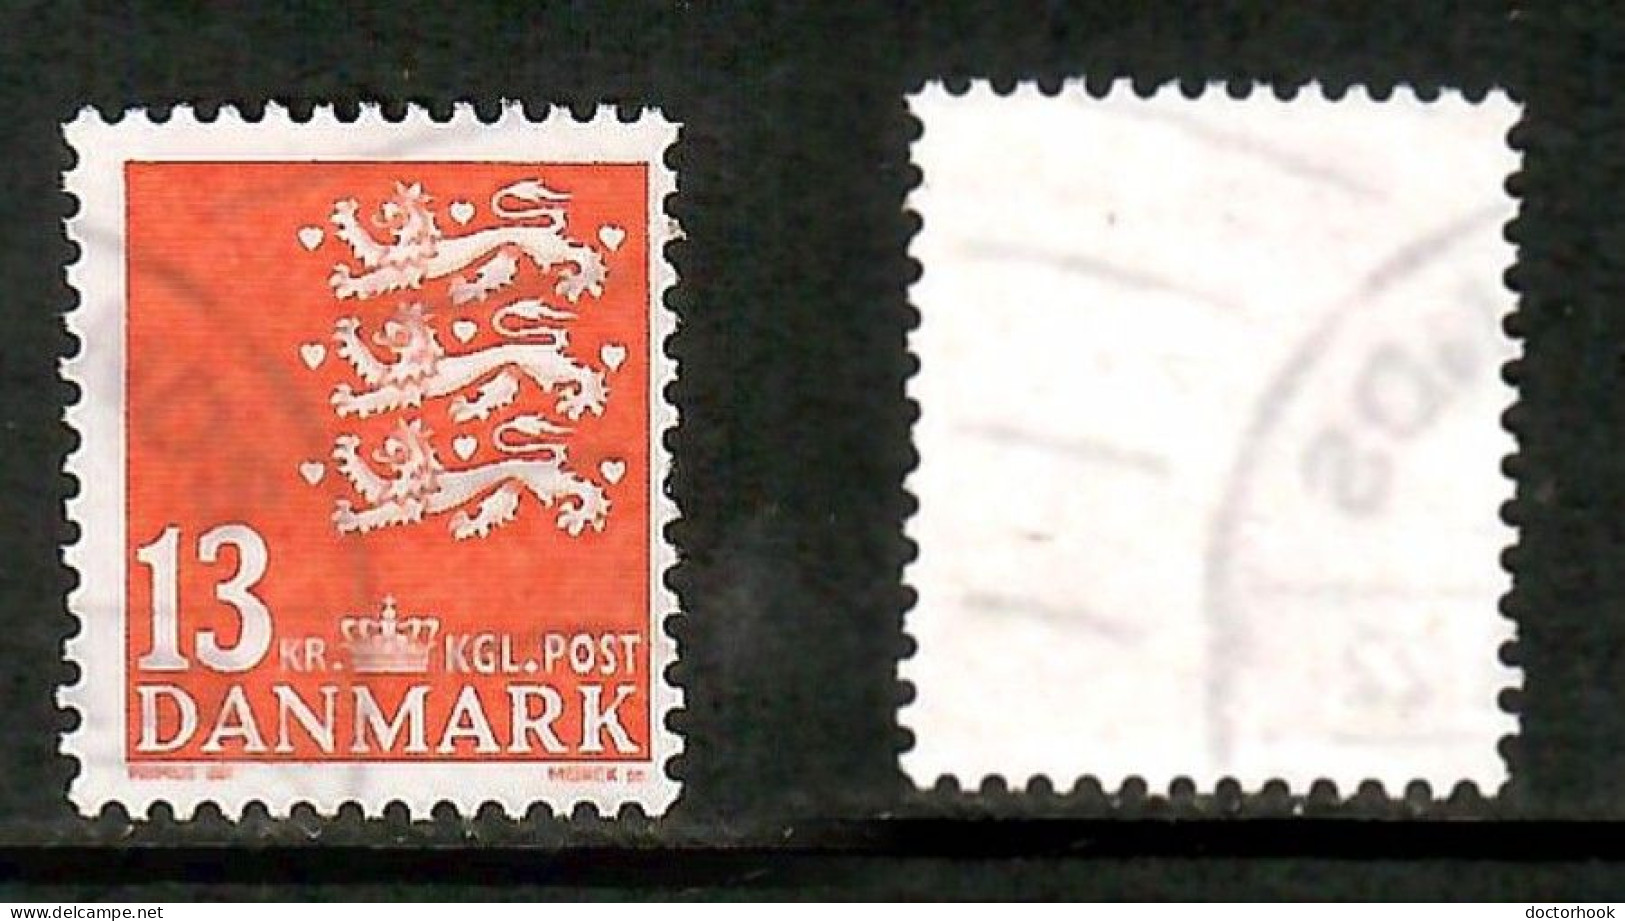 DENMARK   Scott # 1137 USED (CONDITION PER SCAN) (Stamp Scan # 1024-15) - Used Stamps